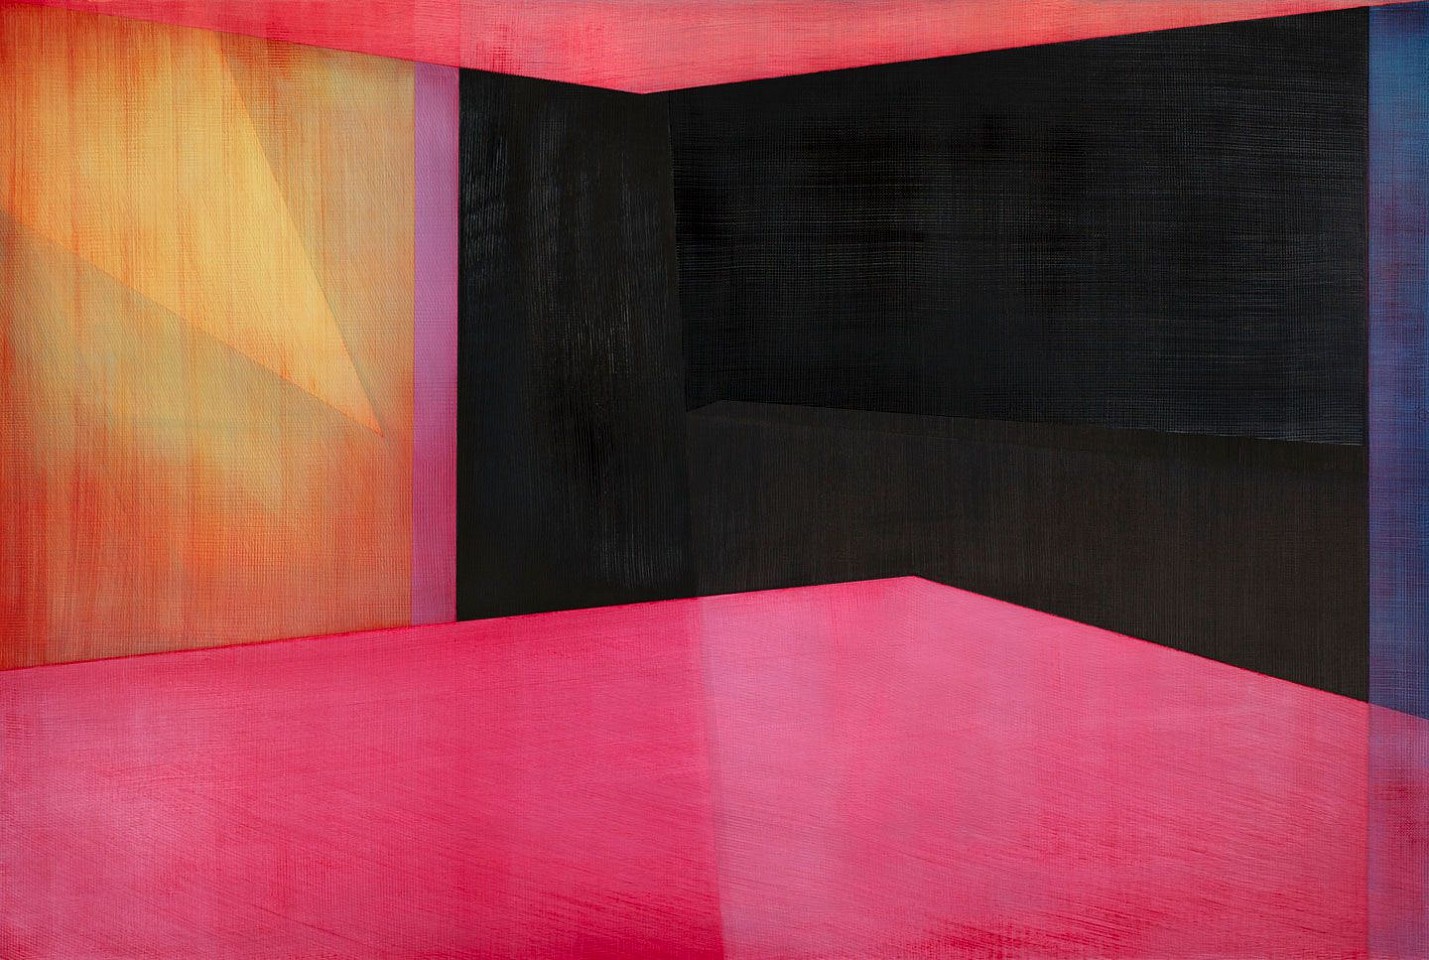 Karin Schaefer
Inclination, 2022
SCHAE119
oil on panel, 40 x 60 inches